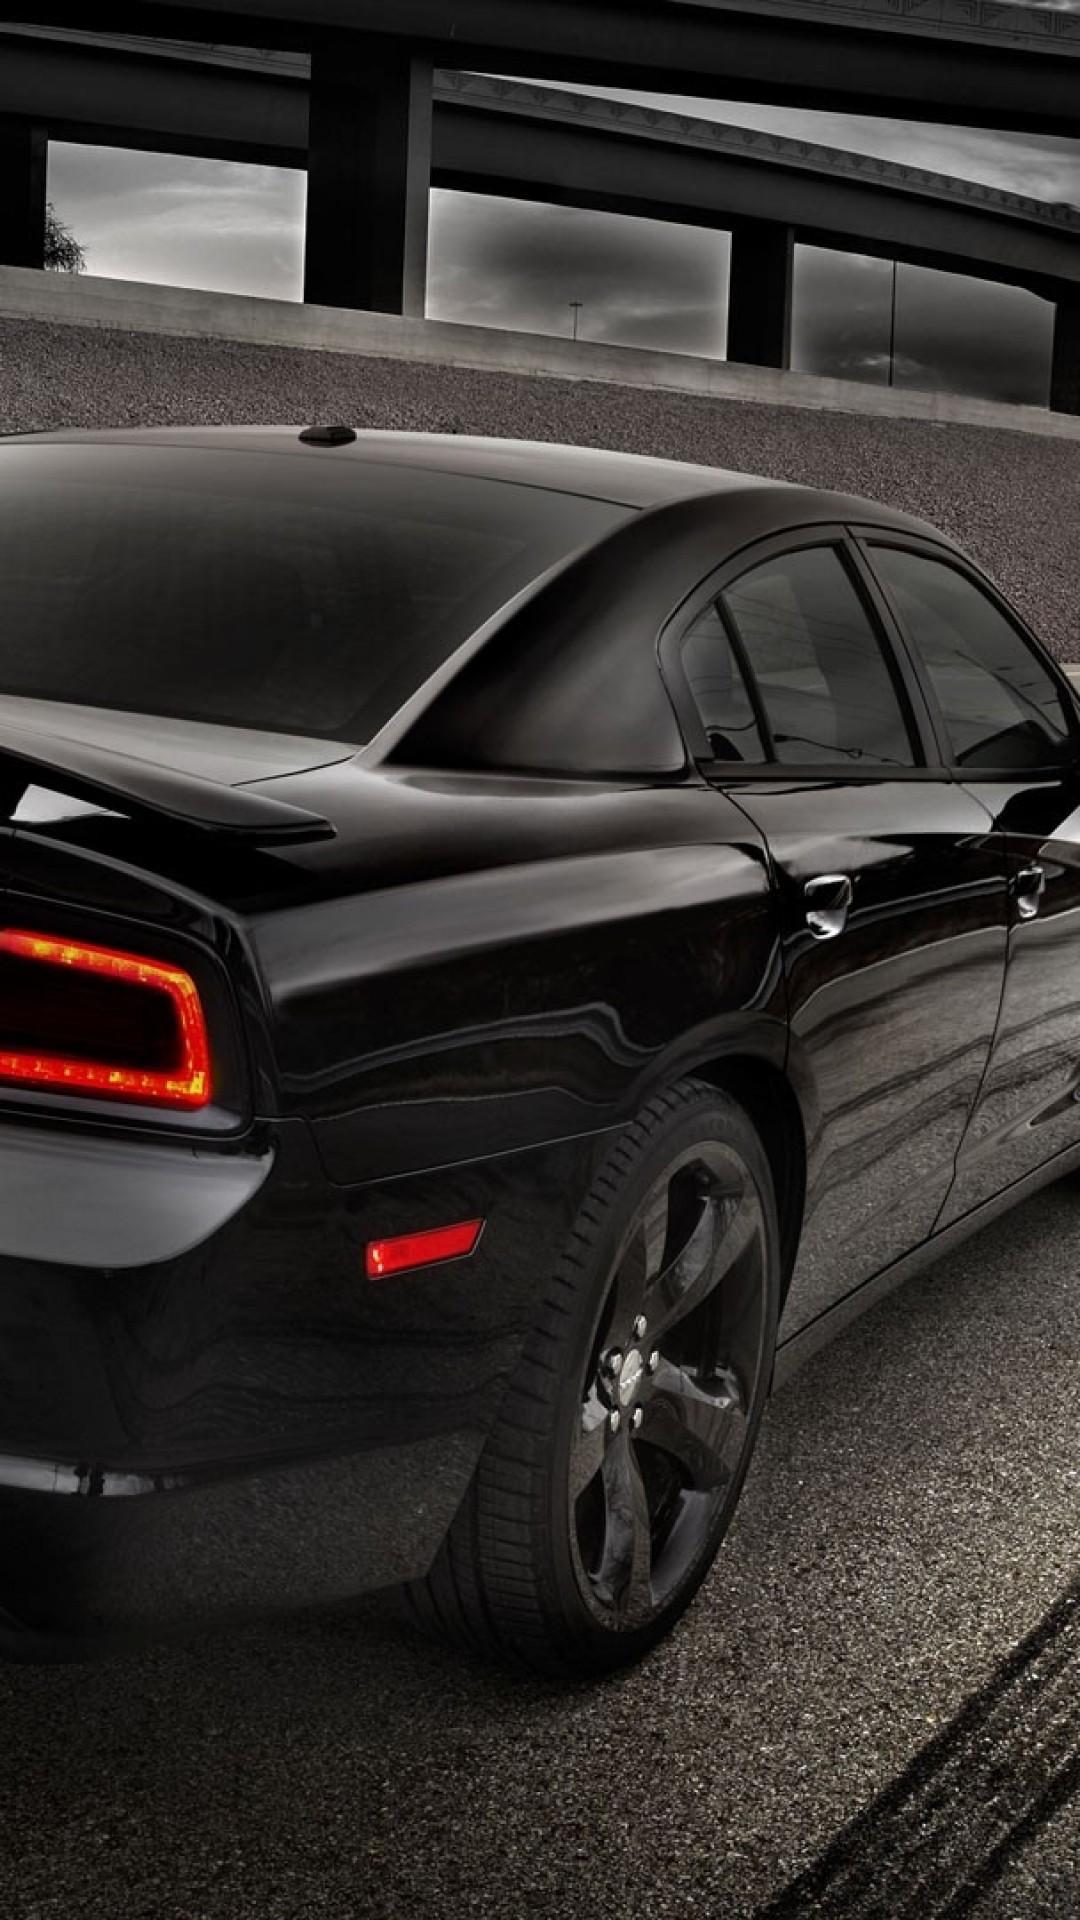 Download 1080x1920 Dodge Charger, Black, Back View, Road, Cars